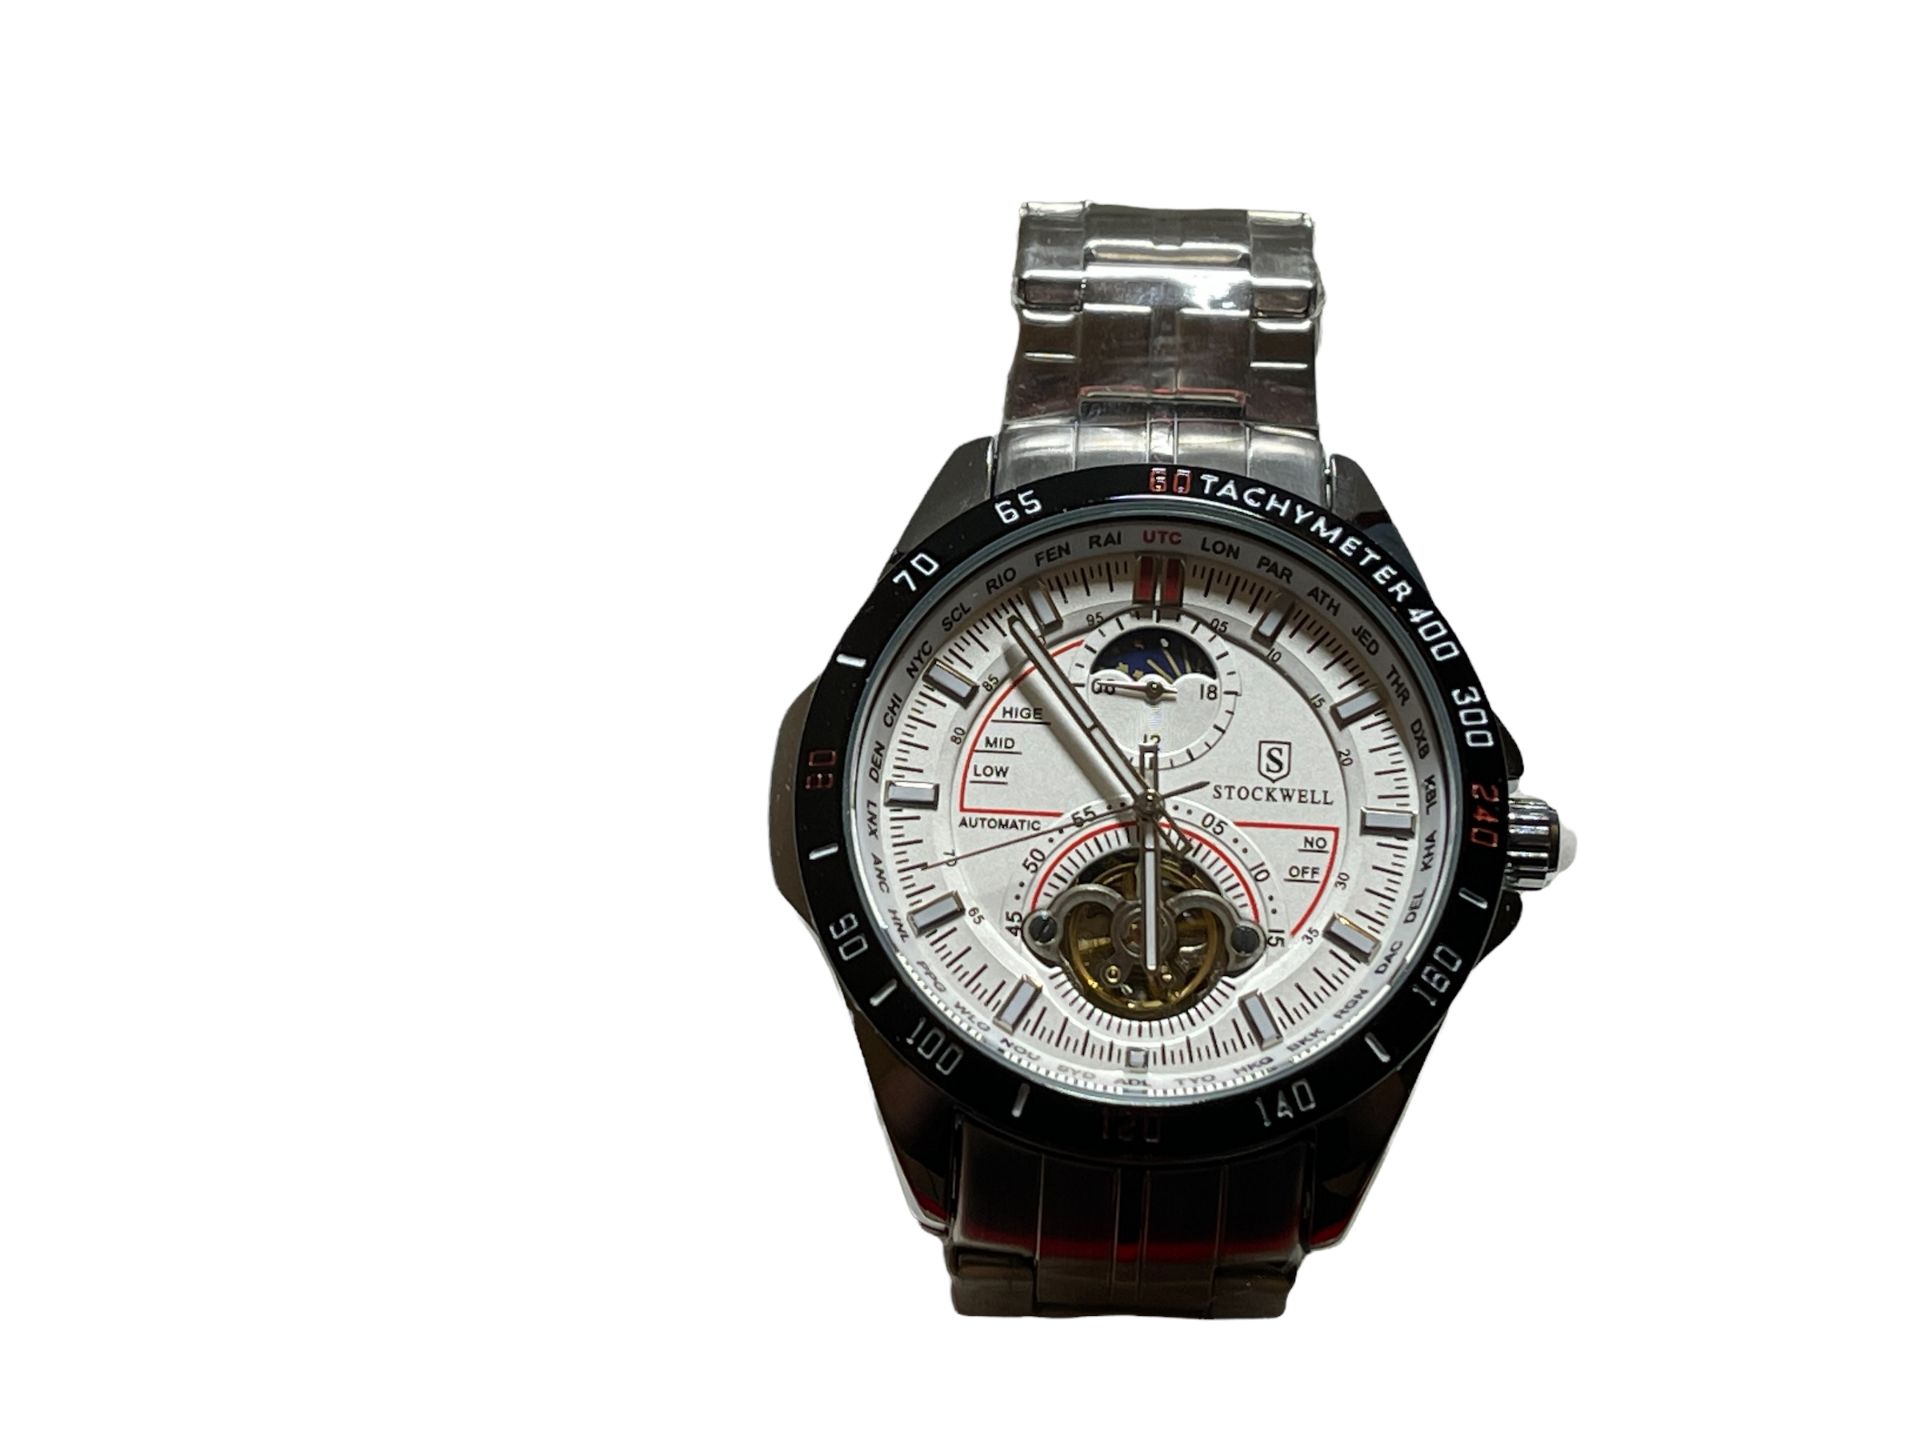 Stockwell Automatic Limited Edition Moon Chronograph Men's watch RRP £500 - Surplus stock